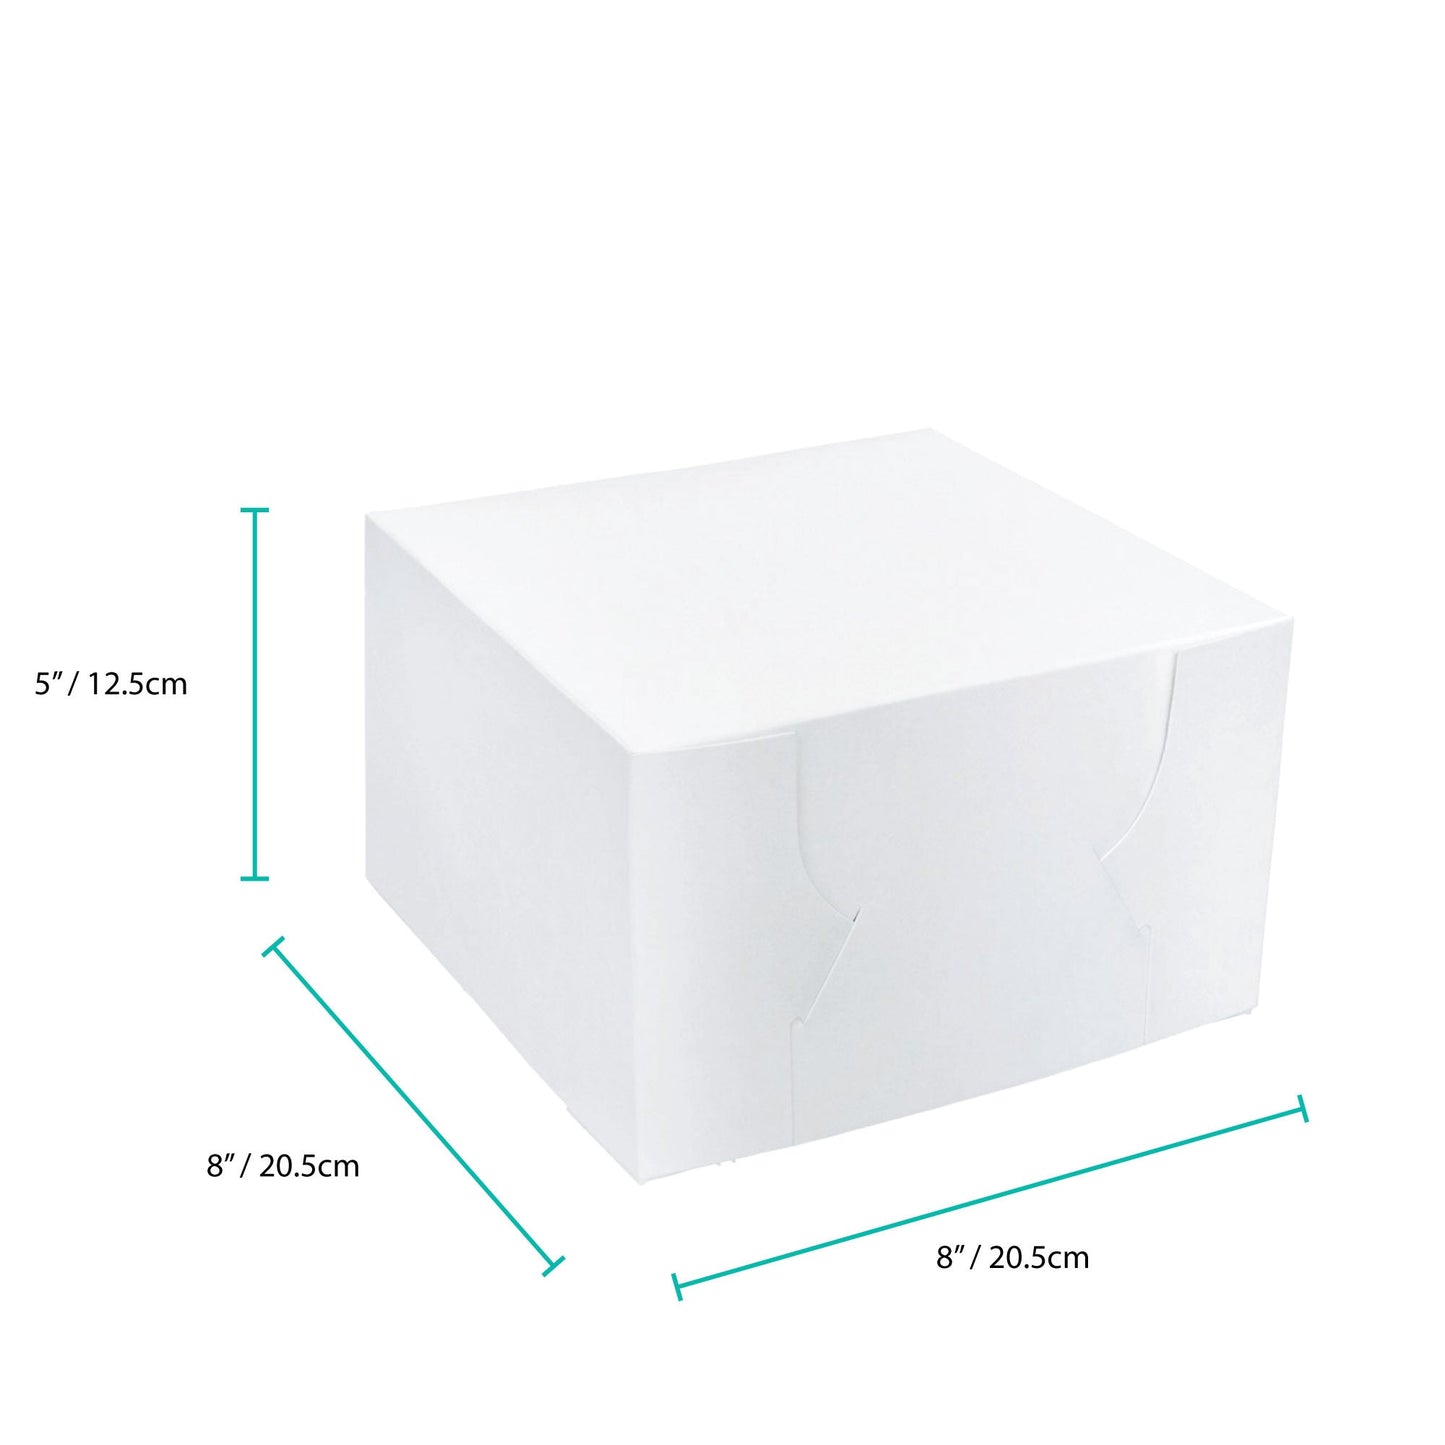 100x Takeaway Cake Box 8x8x5 Inches - Square Folding White Dessert Packaging